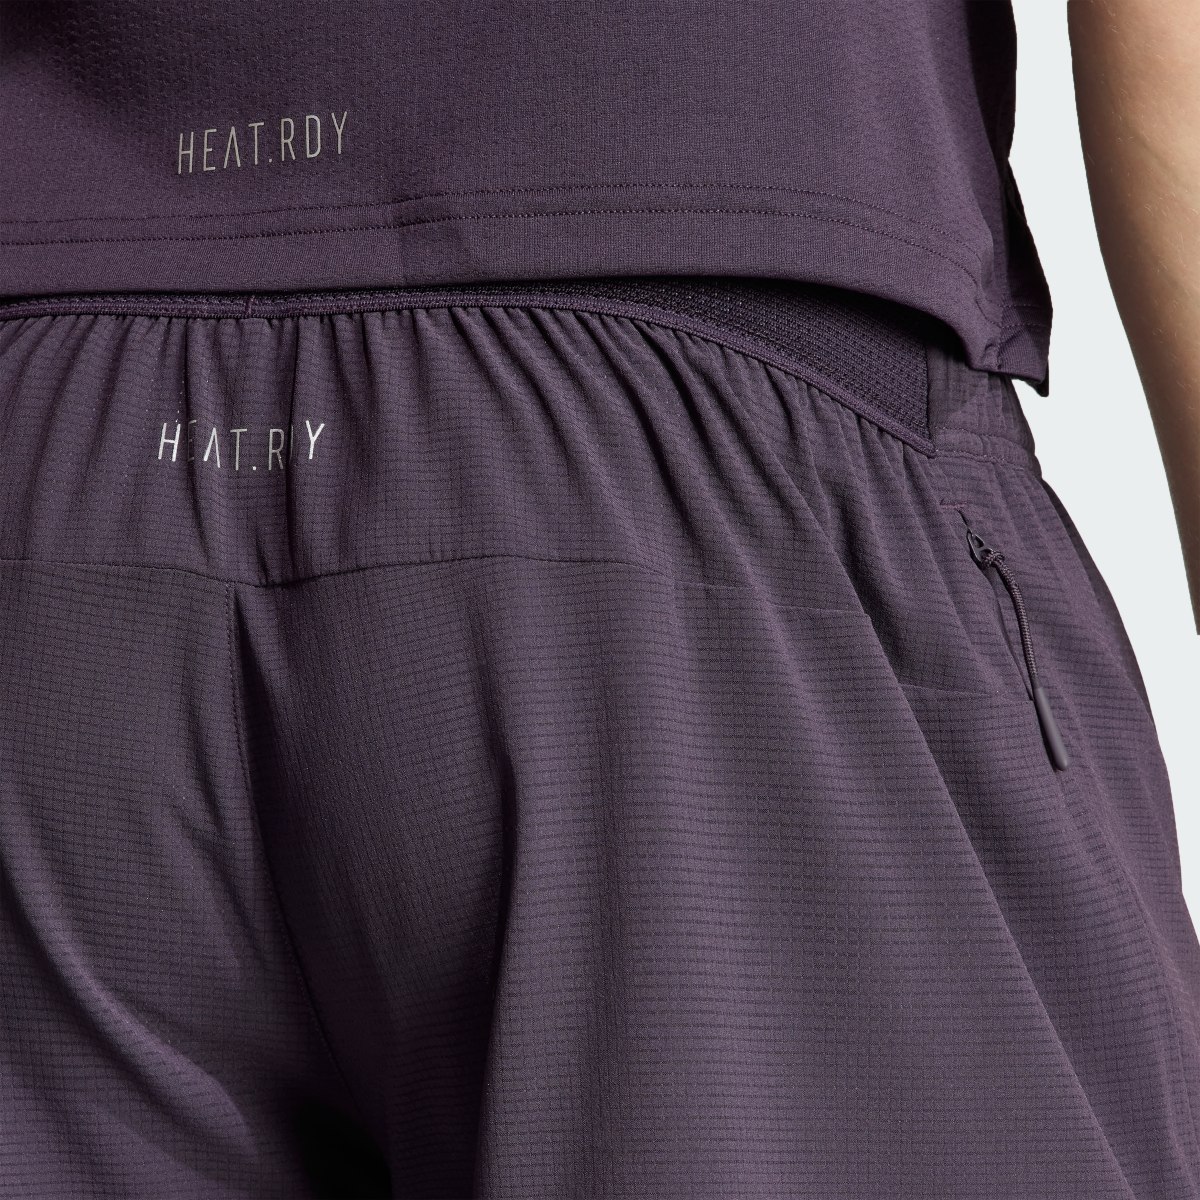 Adidas Short Designed for Training HIIT Workout HEAT.RDY. 6